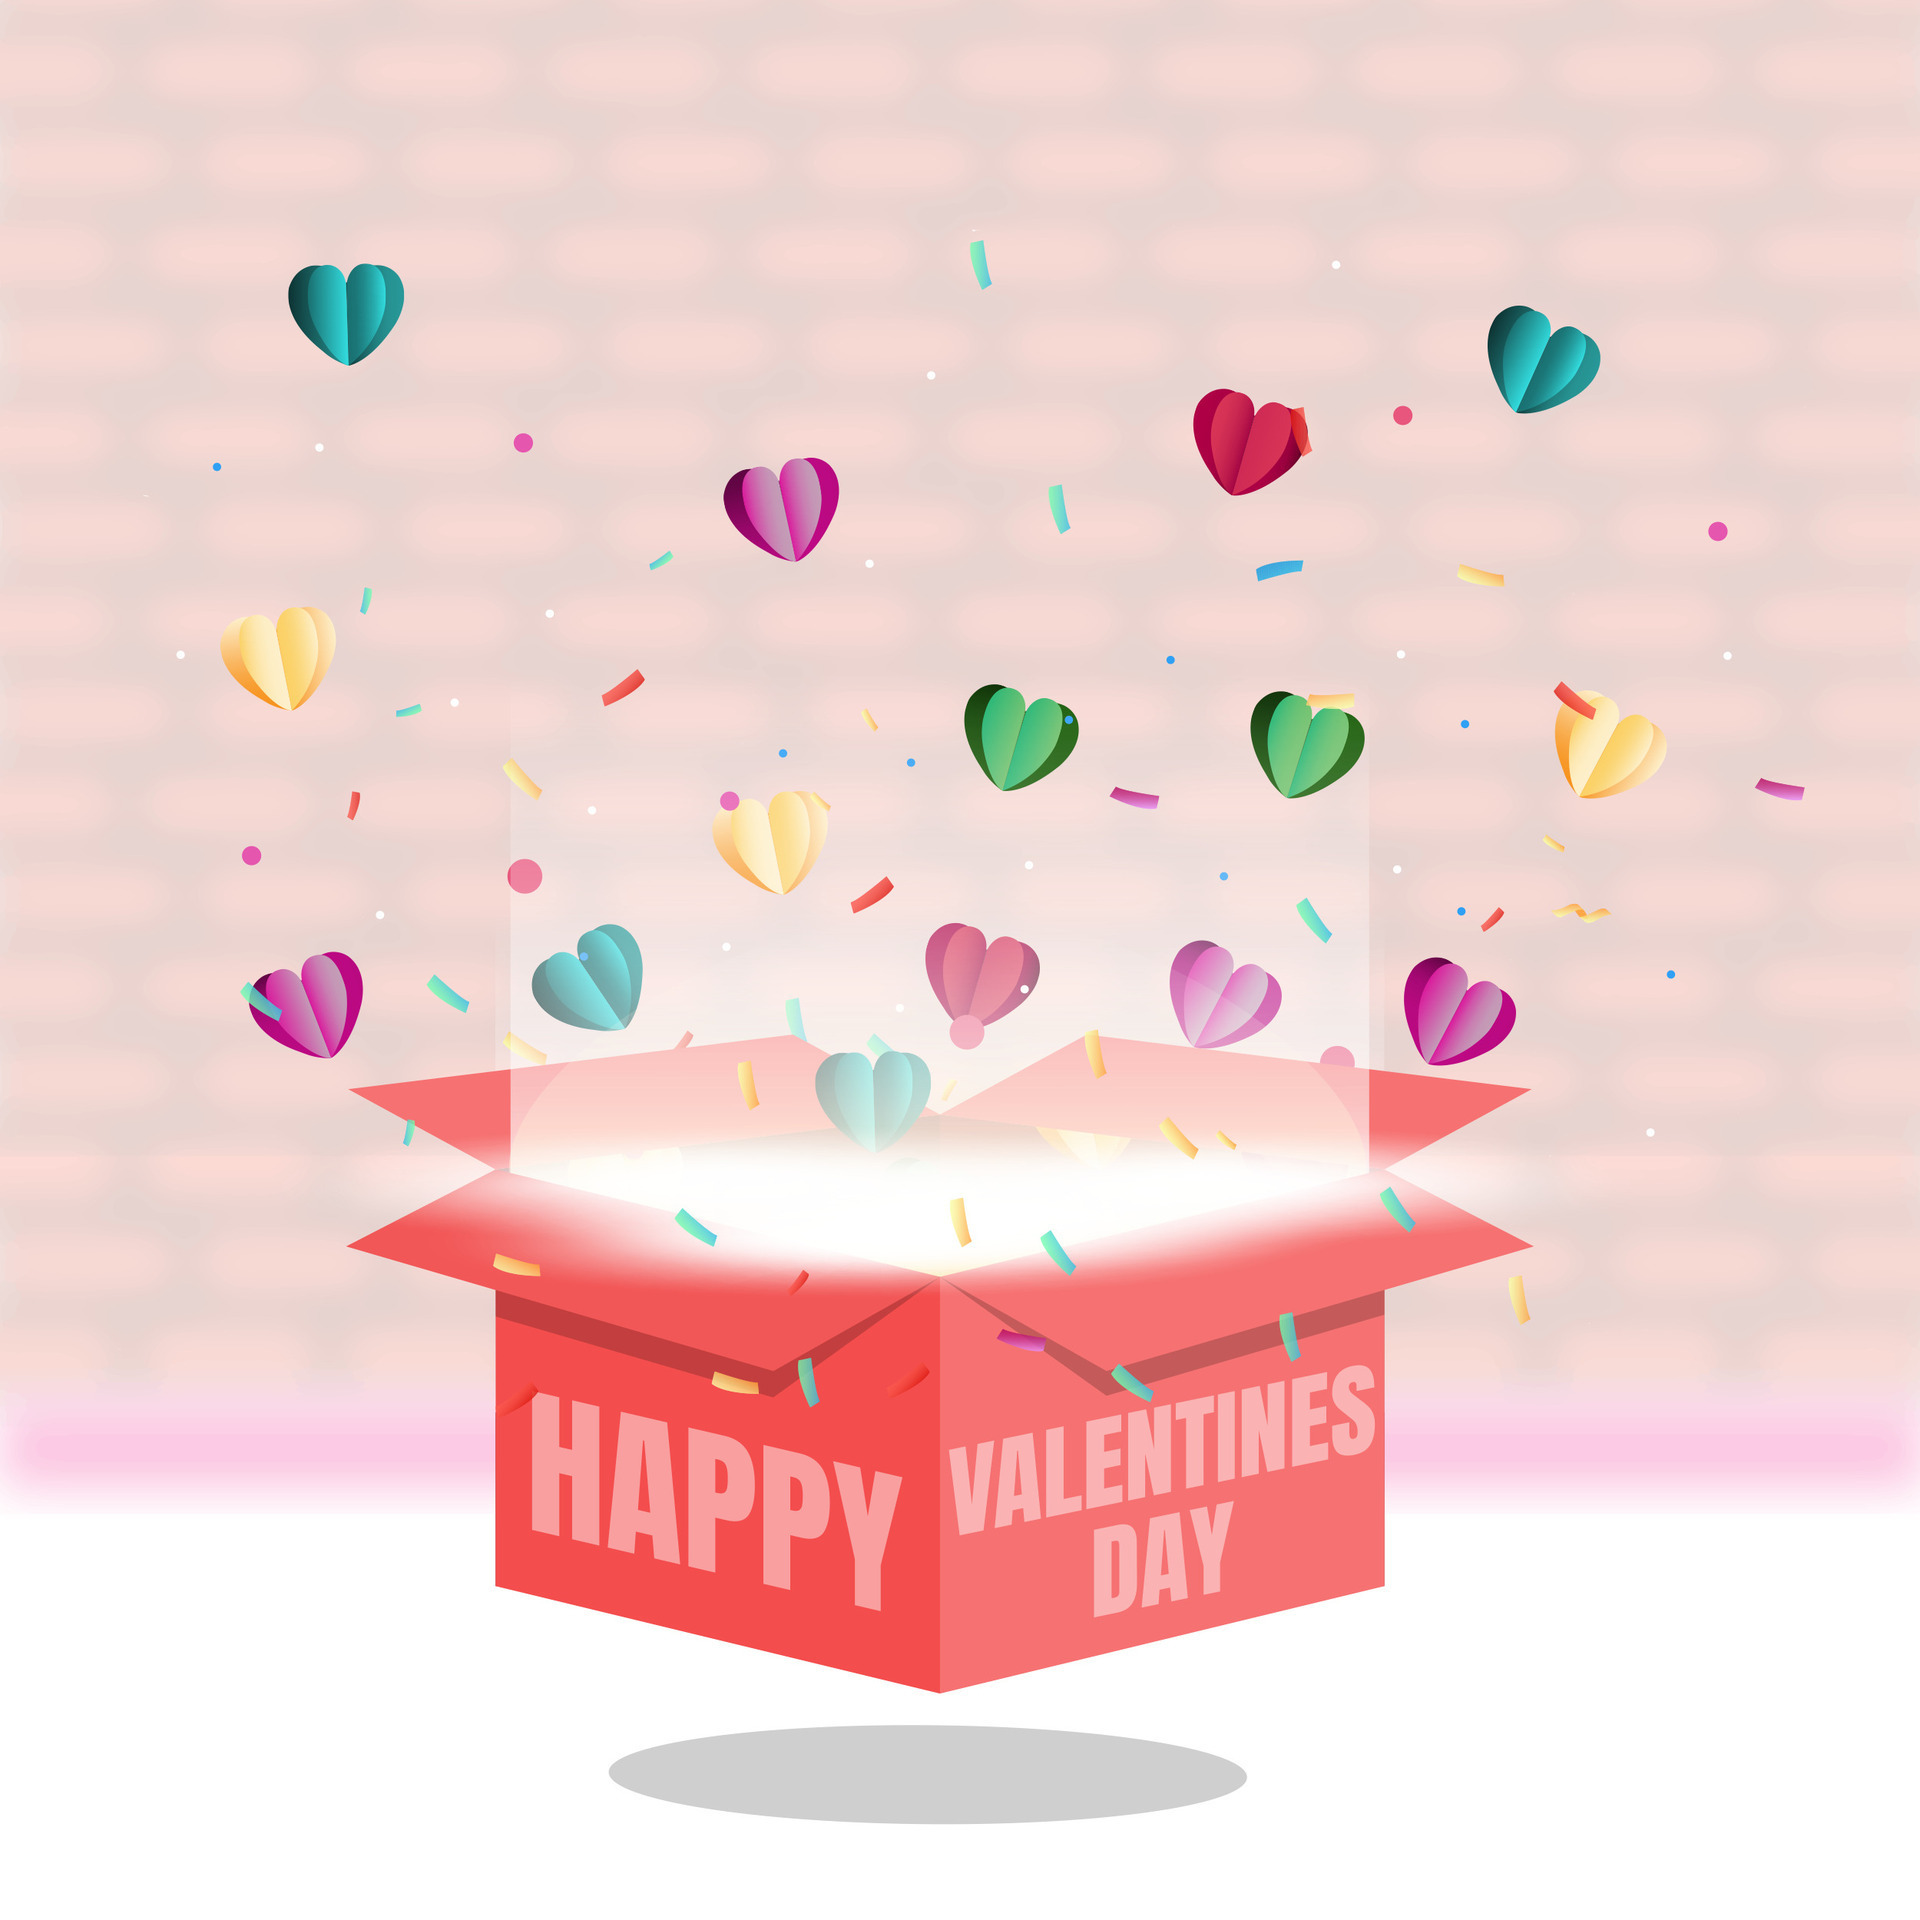 Flying heart confetti, valentines day vector background By